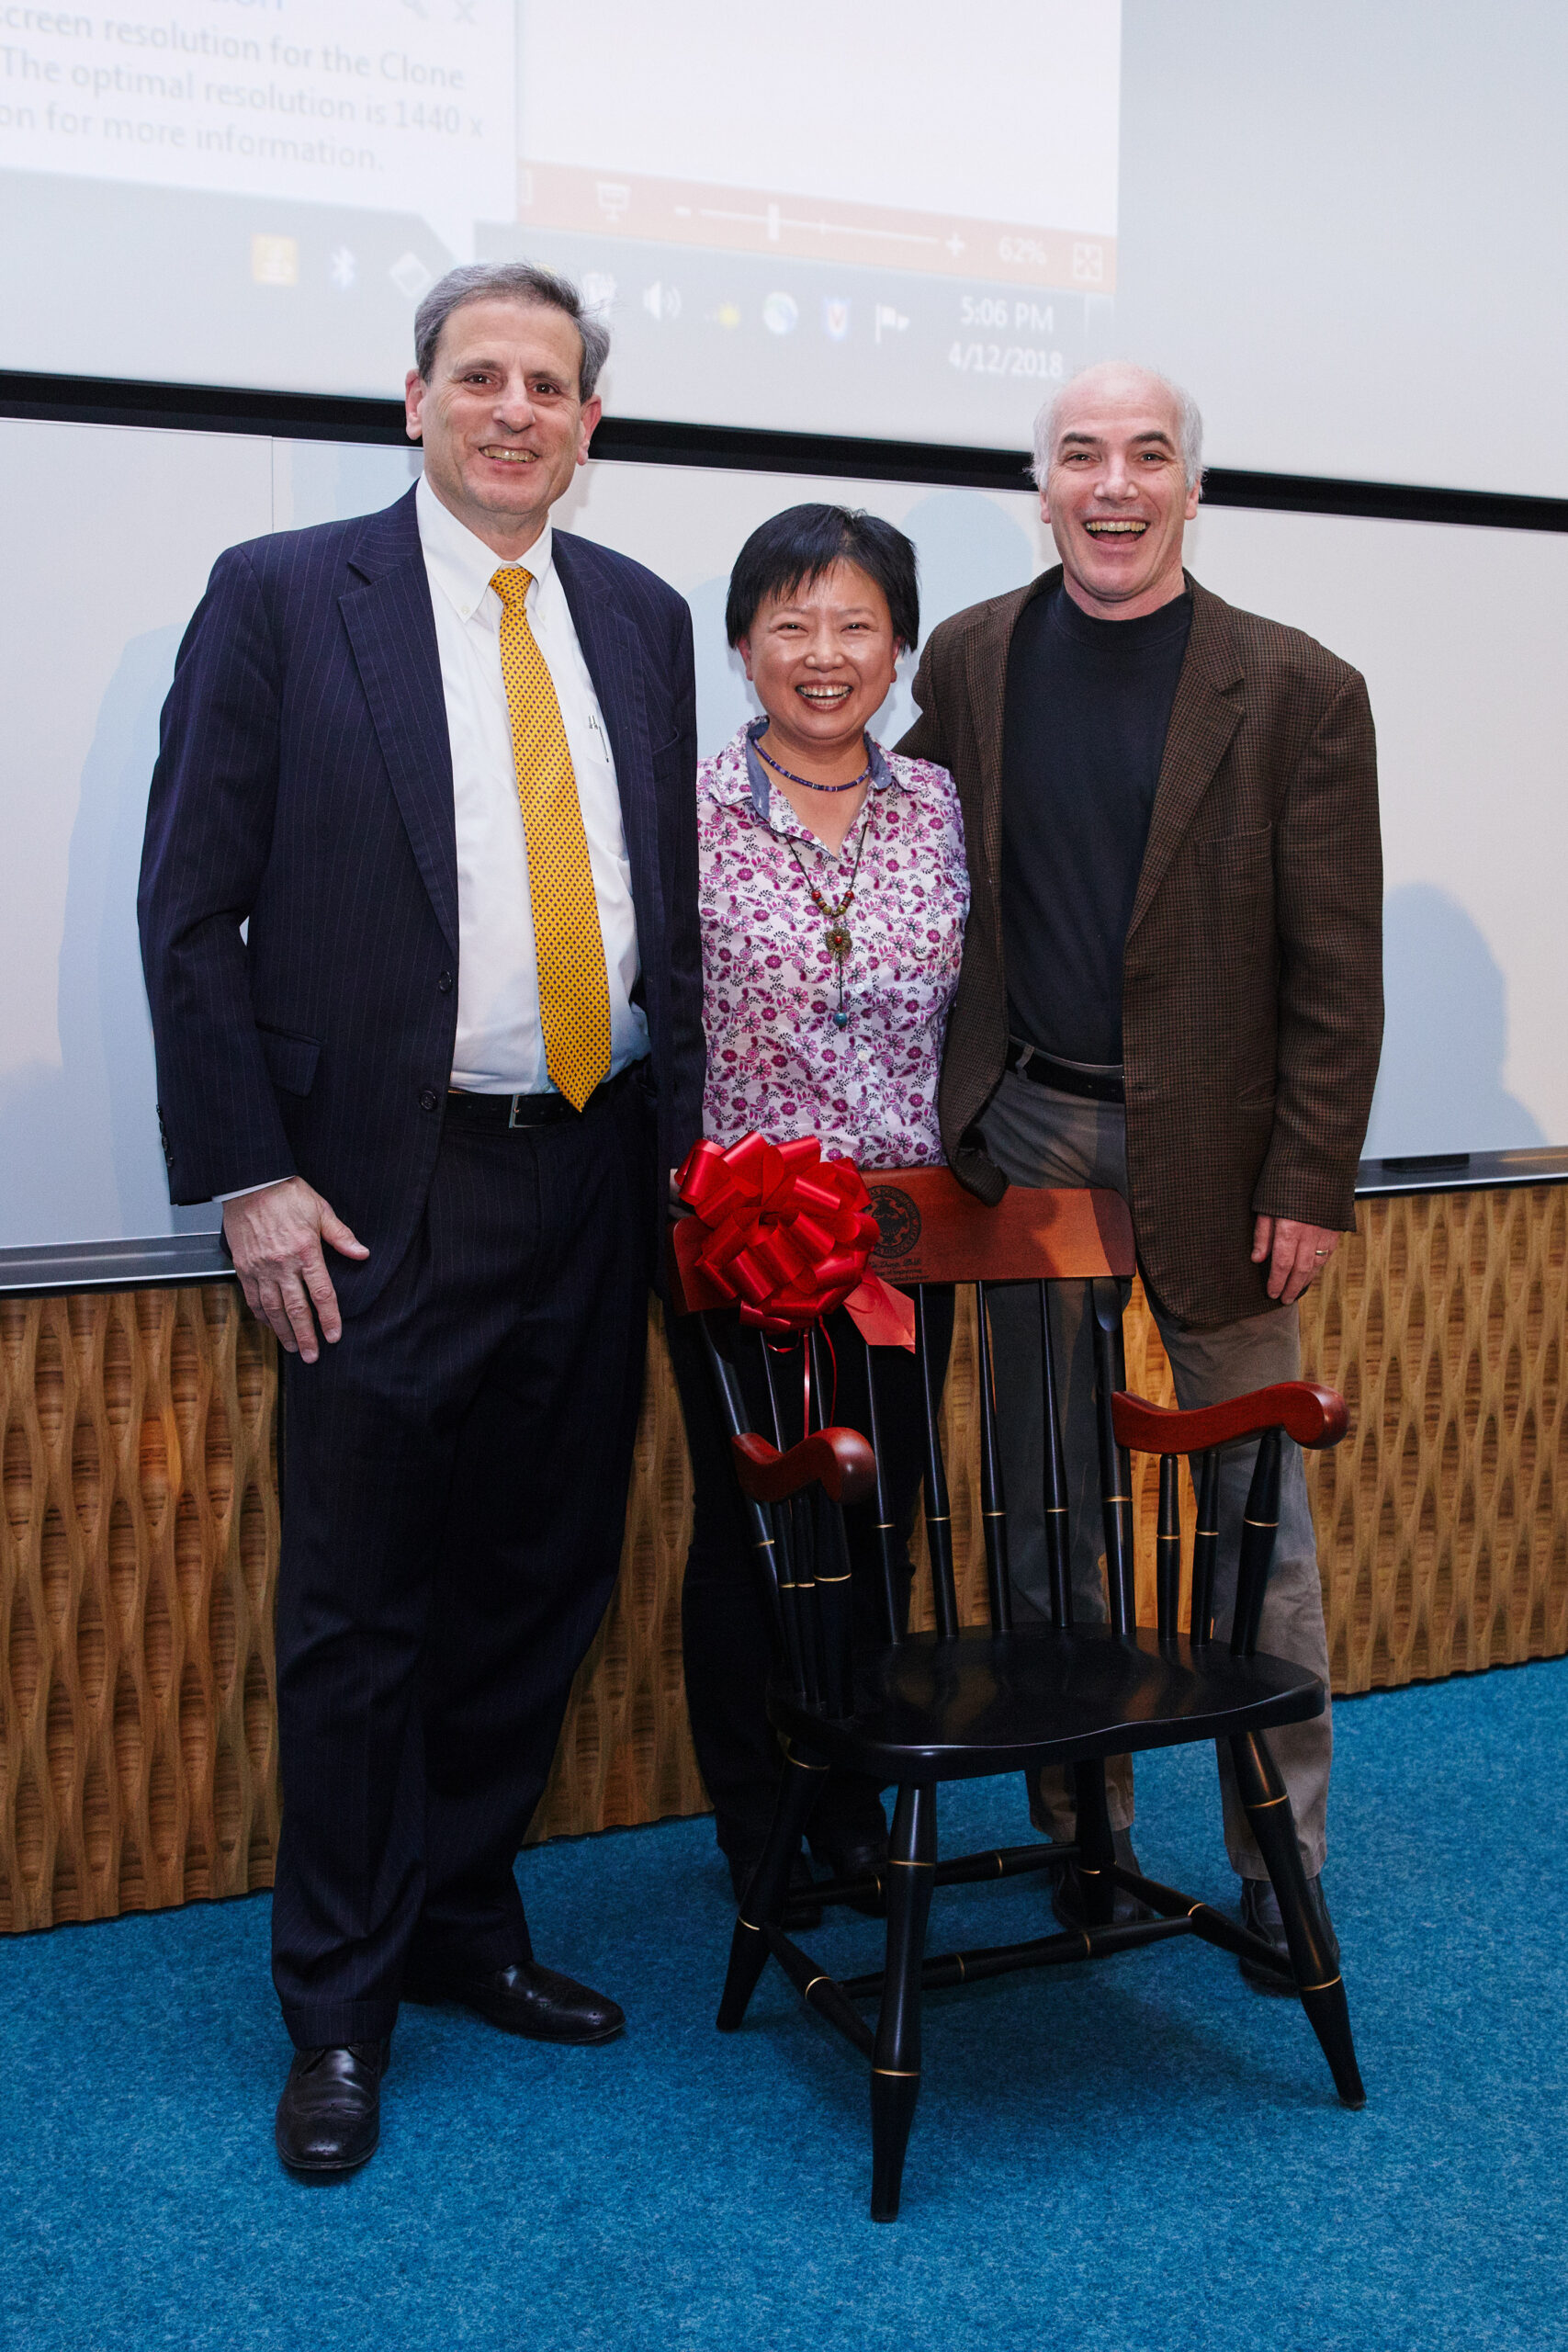 Professor Xin Zhang (center) is presented with the DeLisi Lecture gift by Dean Kenneth R. Lutchen (left) and Director of the Photonics Center and Professor Thomas Bifano (ME, MSE, BME). Photo by Dave Green